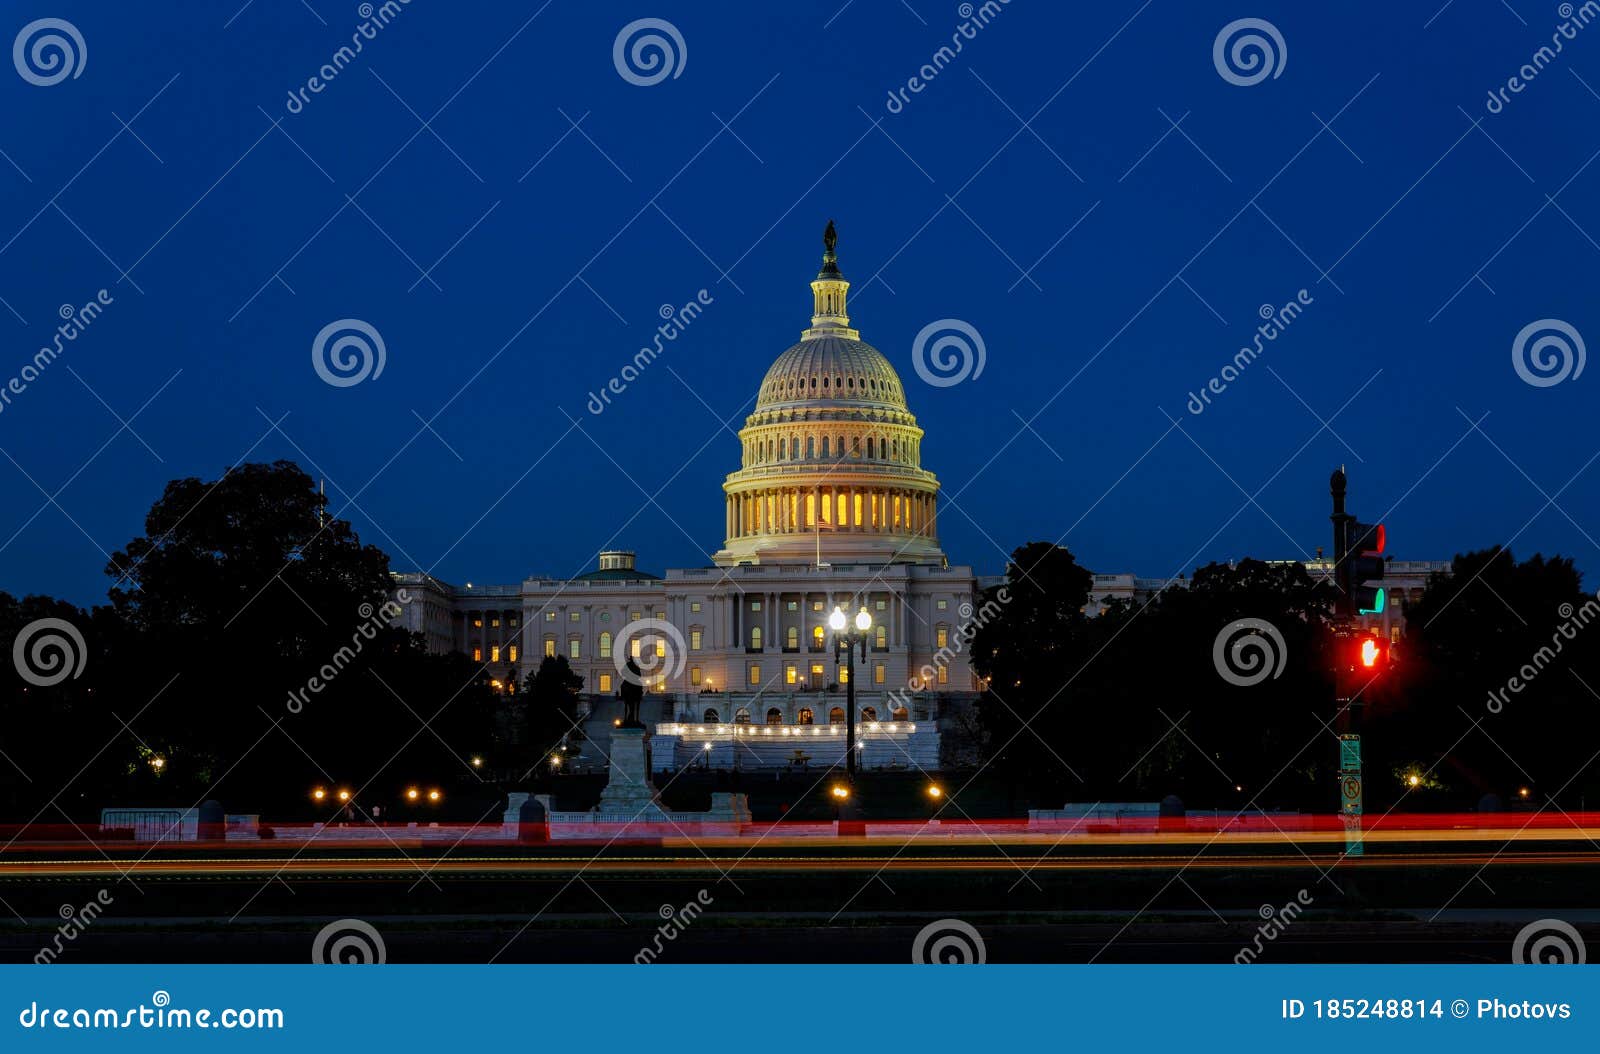 the united states capitol building with the dome lit up at night the senate and house sides of the building